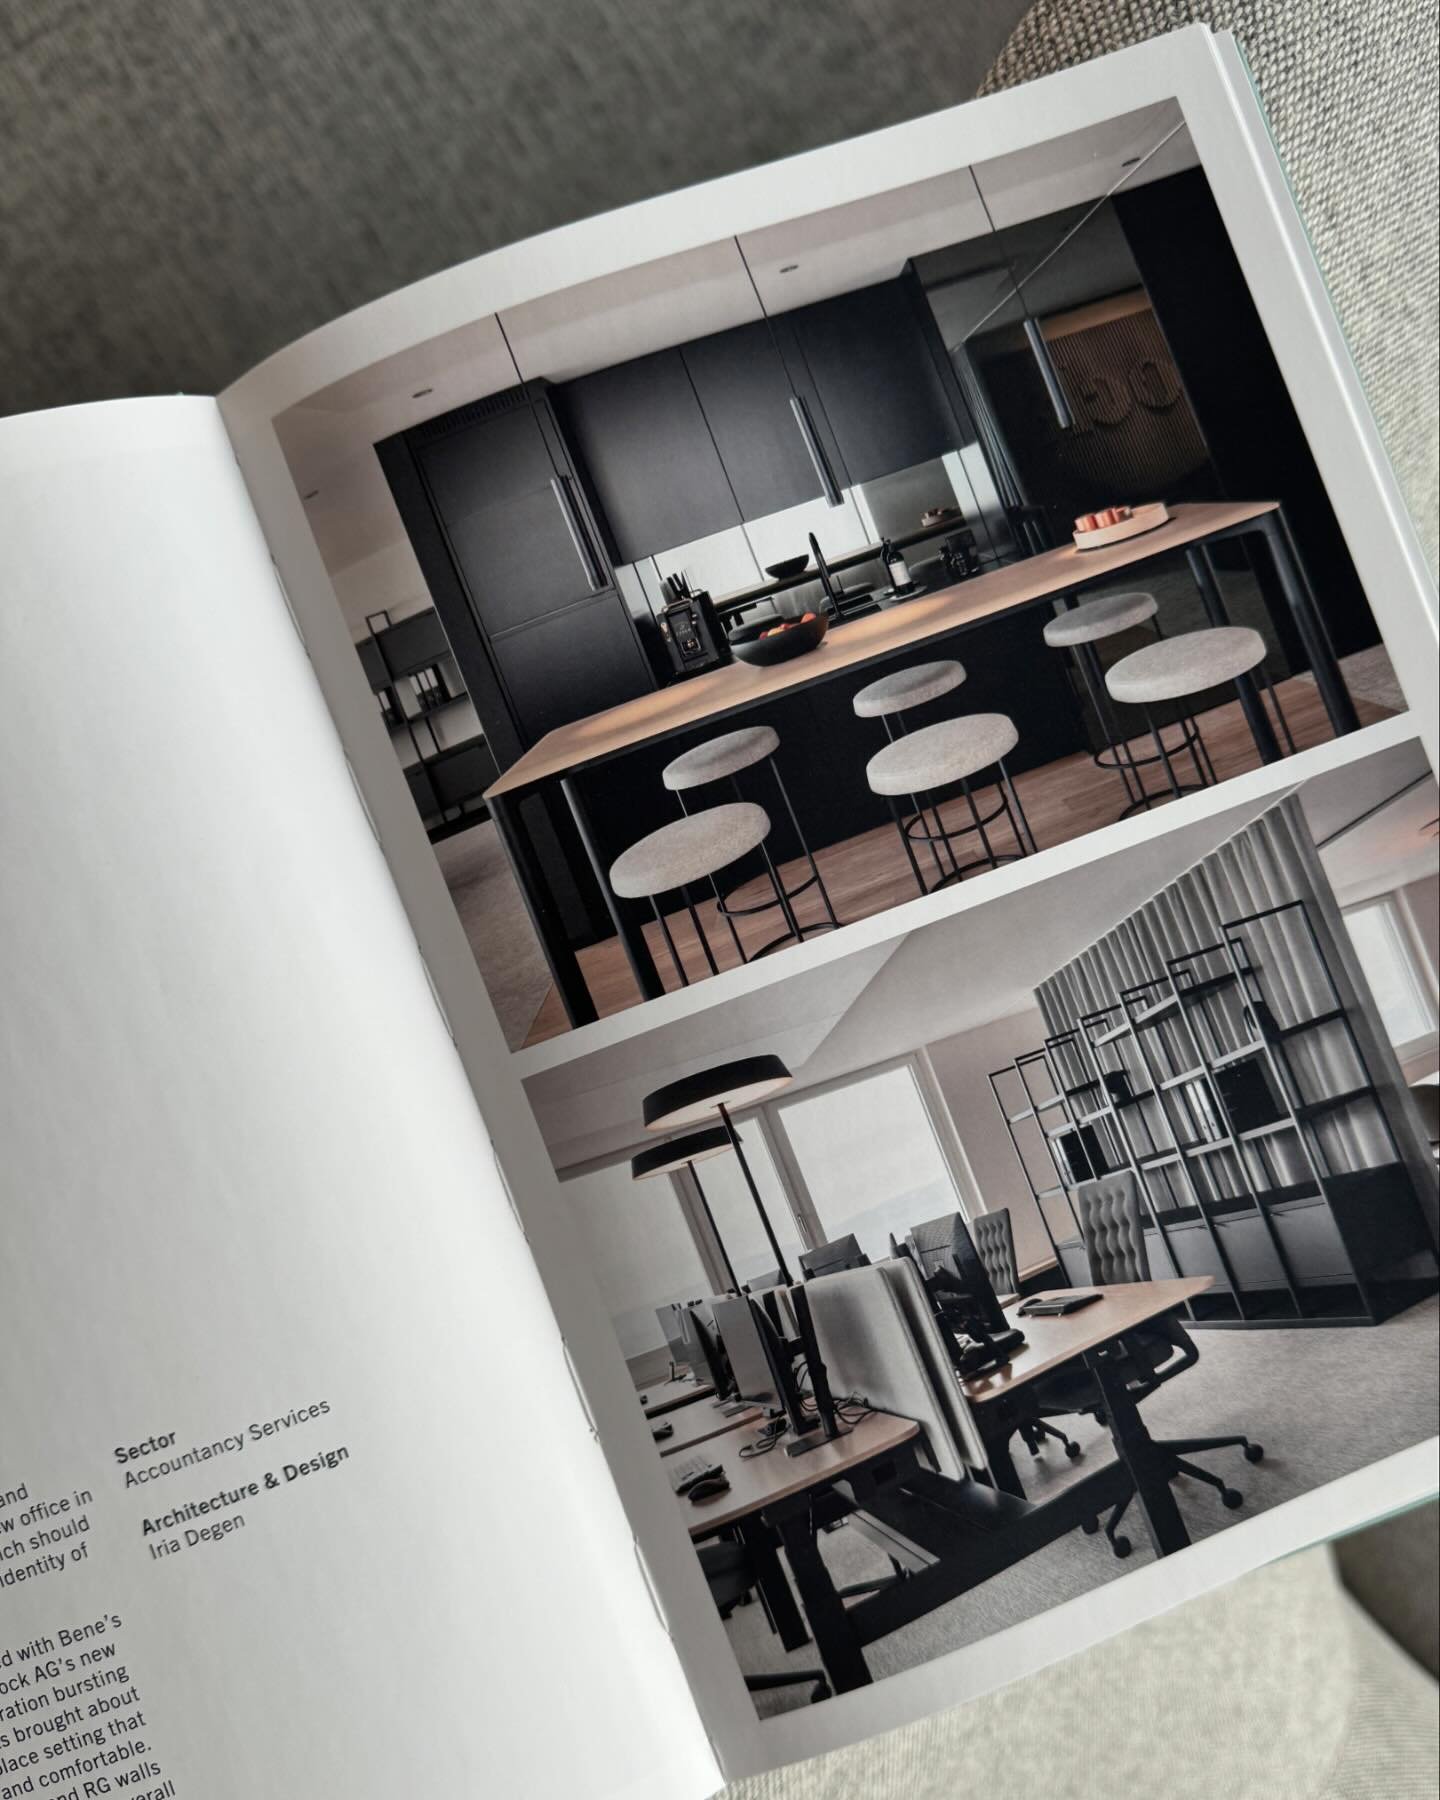 Happy to have created new high level references with Bene @beneoffice - featured in the inspiring Bene Work Book #officedesign #interiordesign #interiorarchitecture #iriadegeninteriors #hyrock @hygh_magazine #beneoffice #inspiration